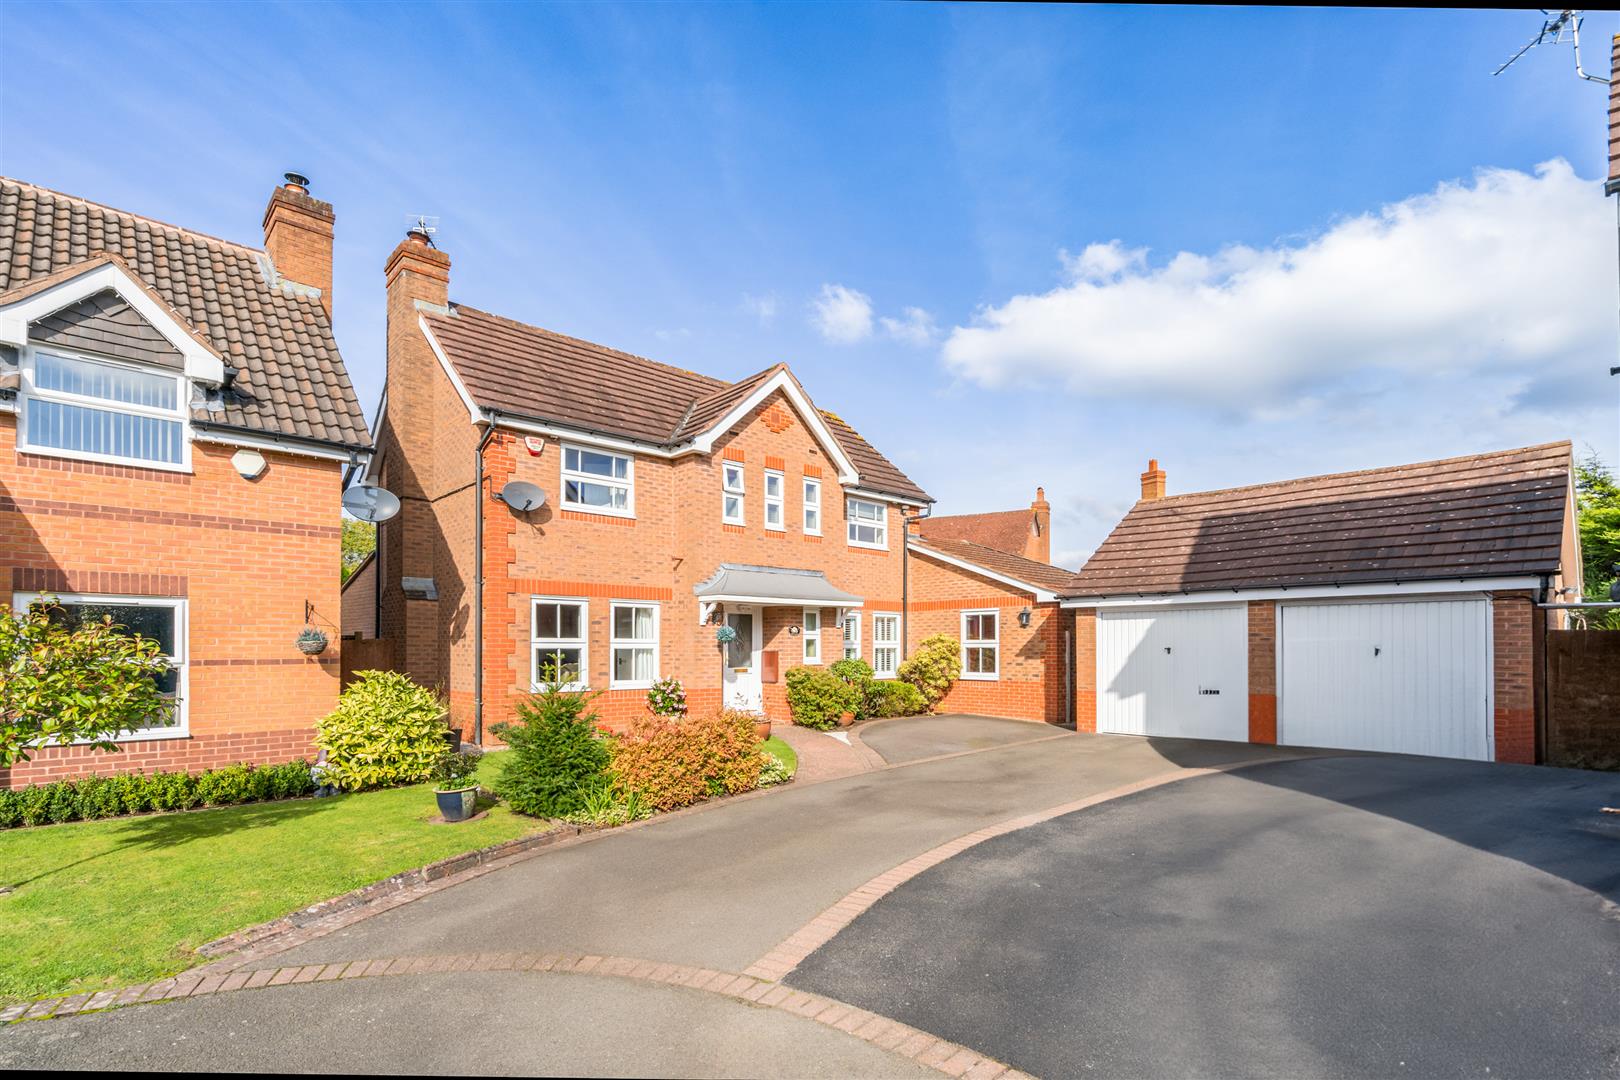 4 bed detached house for sale in Bradmore Close, Solihull  - Property Image 1